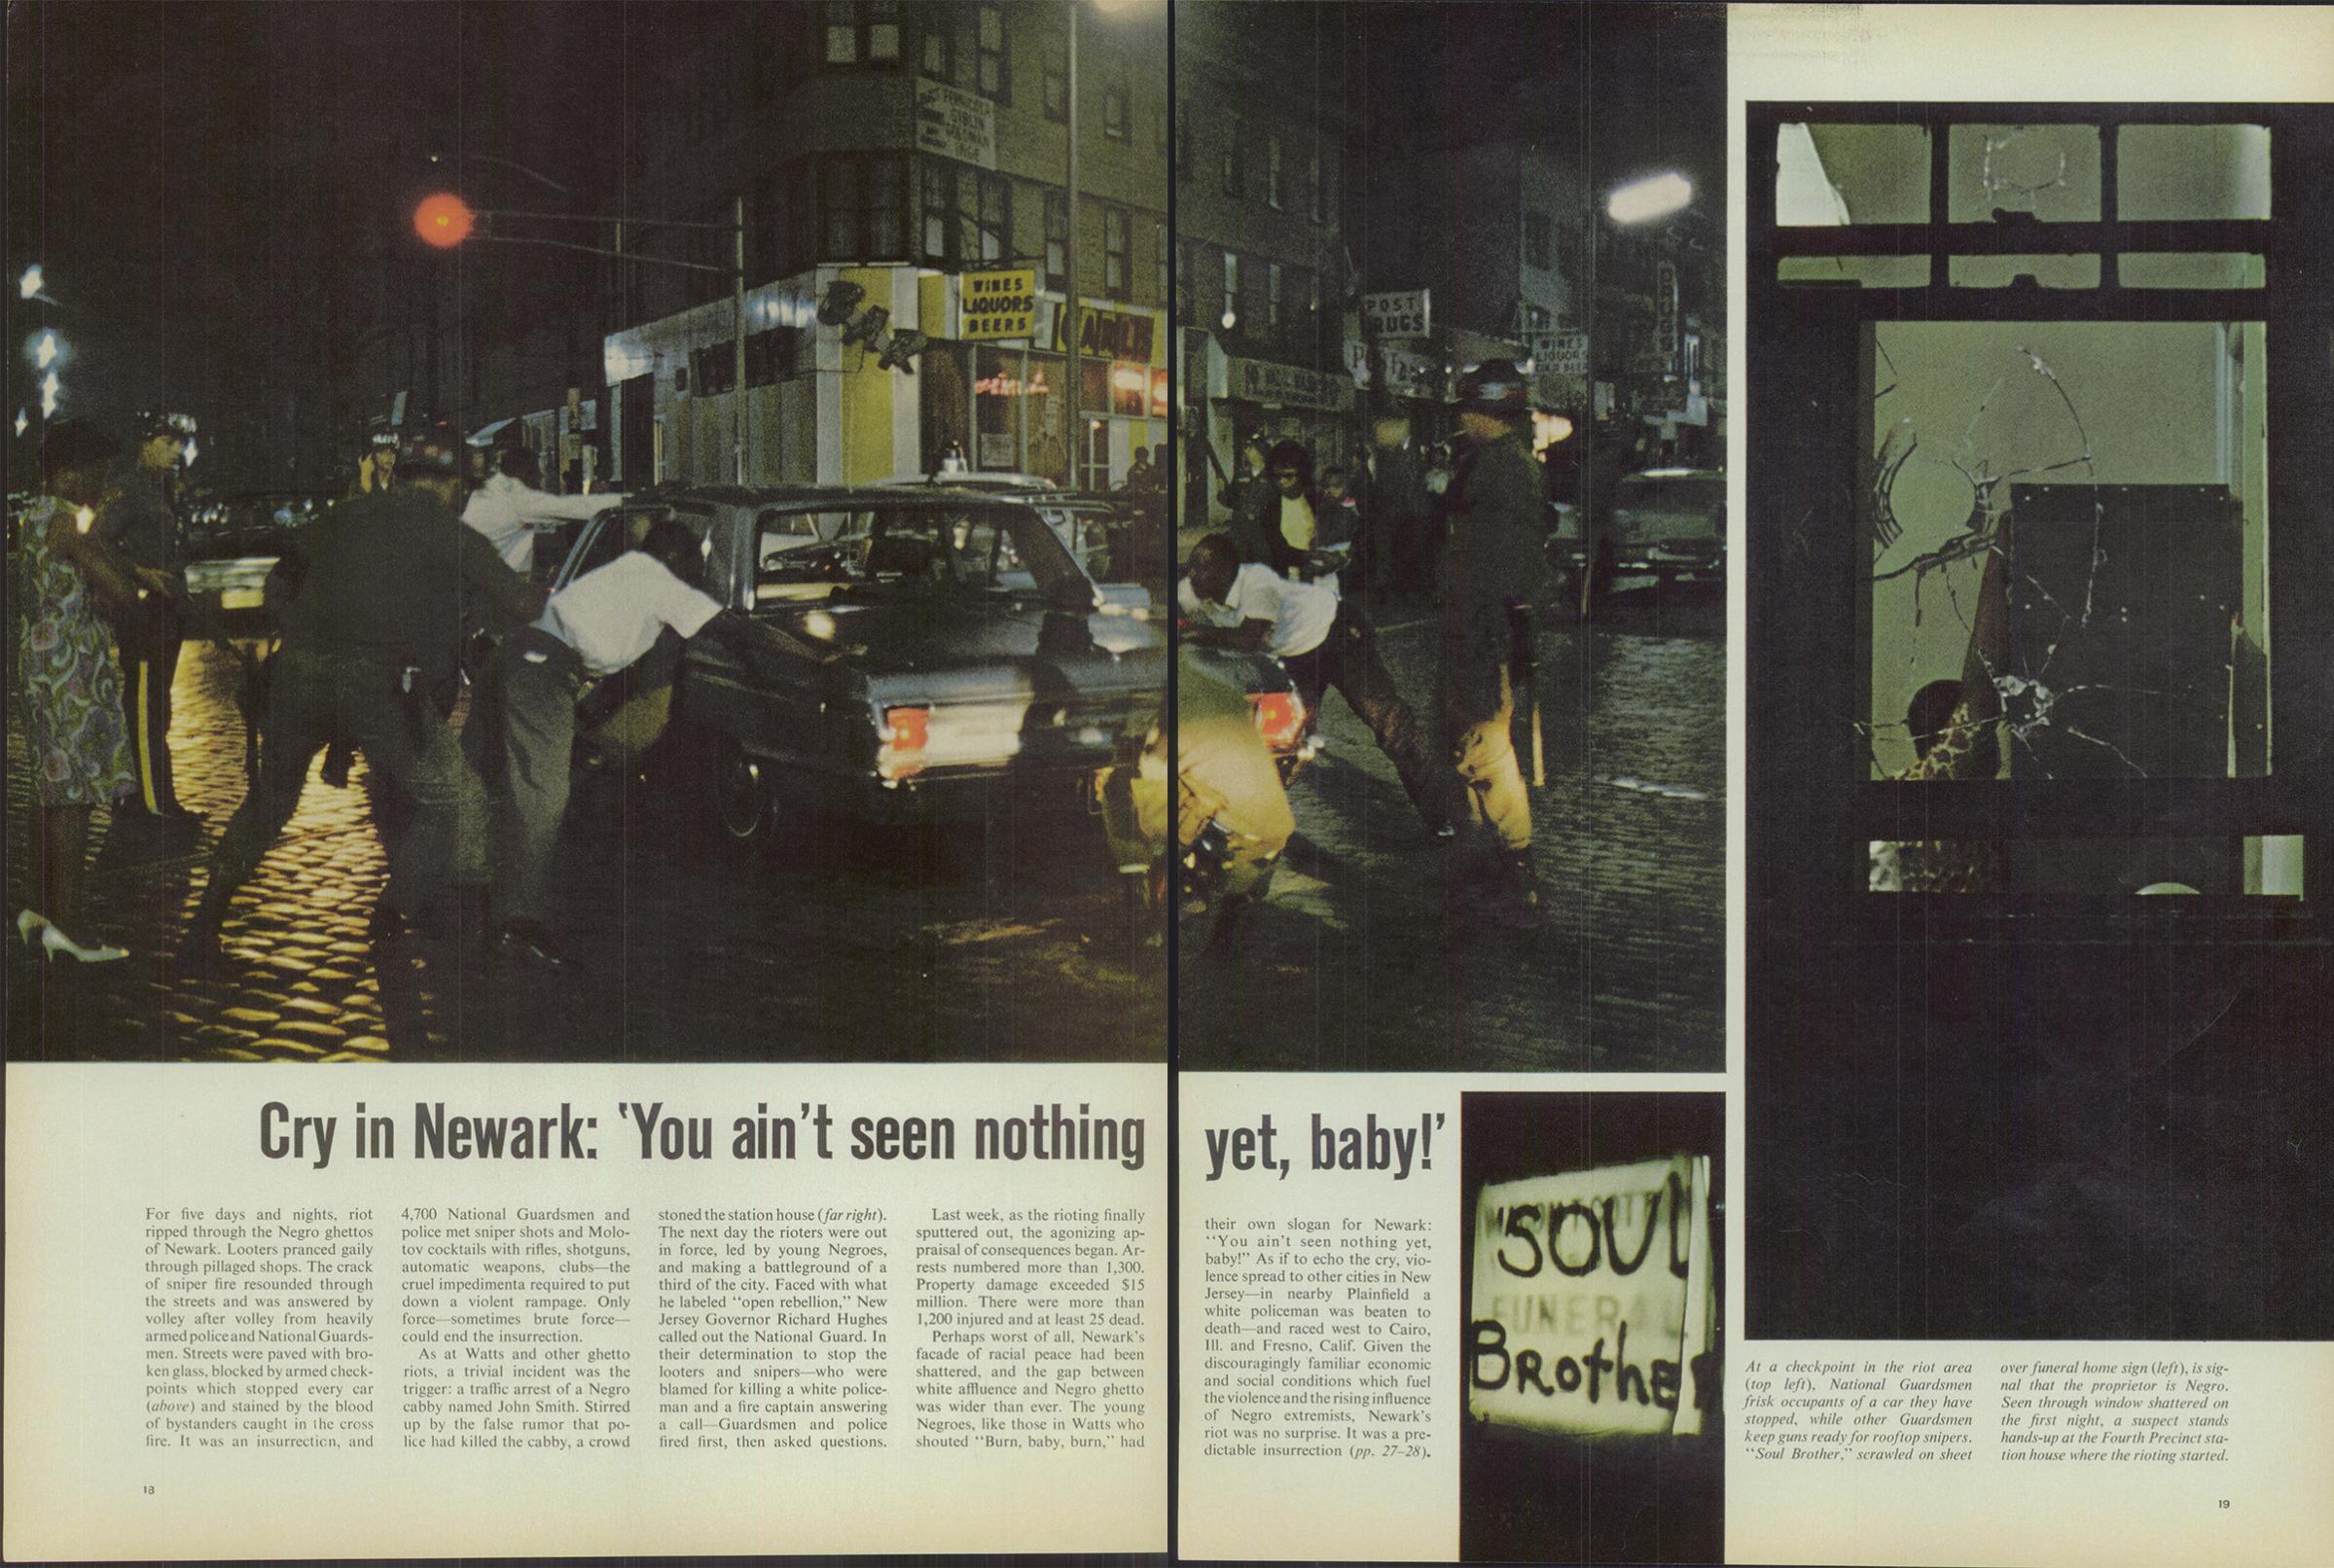 LIFE coverage of the Newark riots from the July 28, 1967 issue. Photos by James Pickerell and Bud Lee.